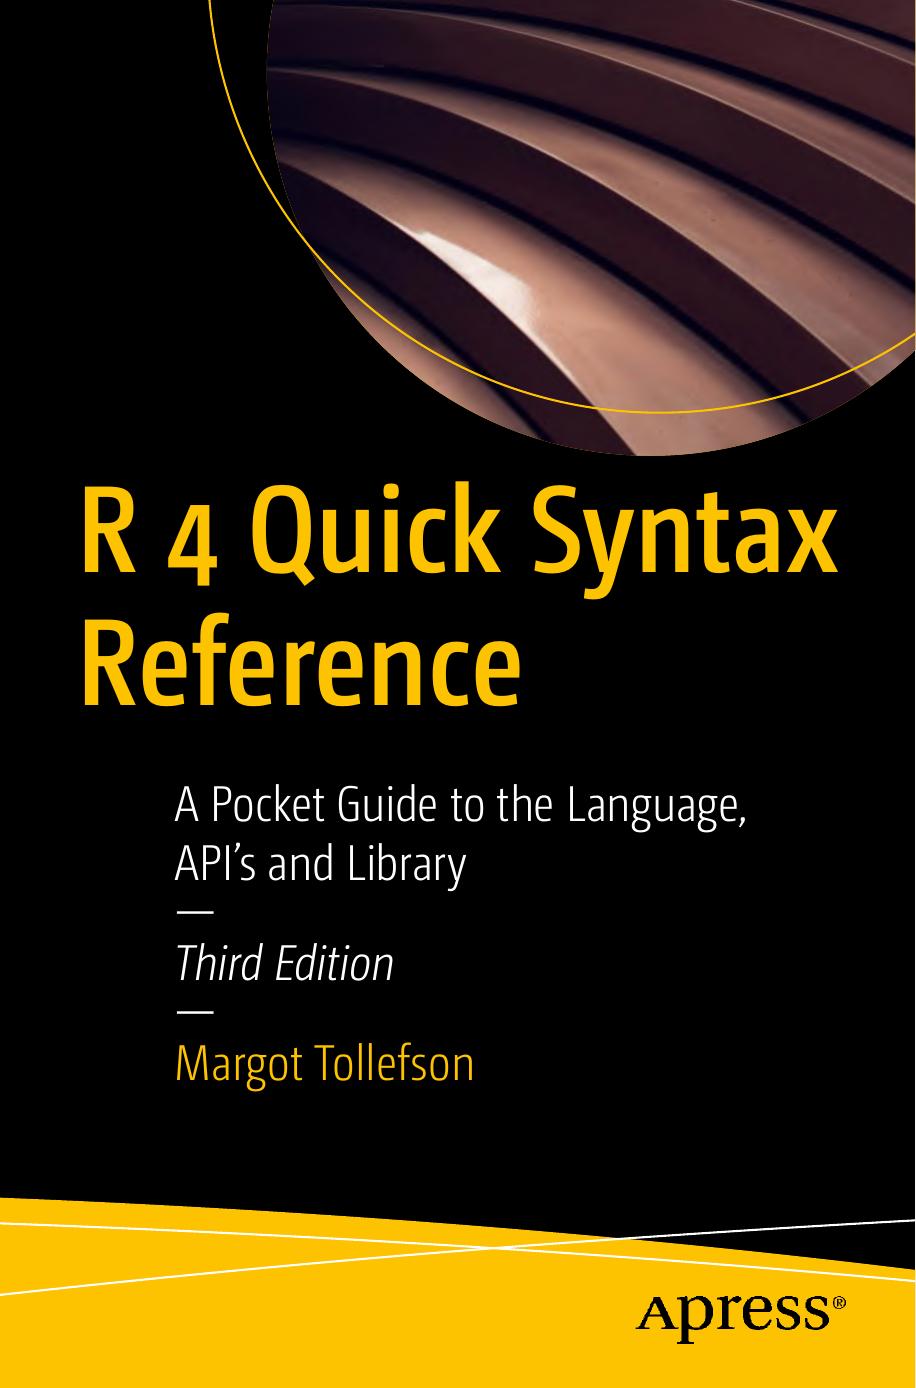 R 4 Quick Syntax Reference: A Pocket Guide to the Language, API's and Library